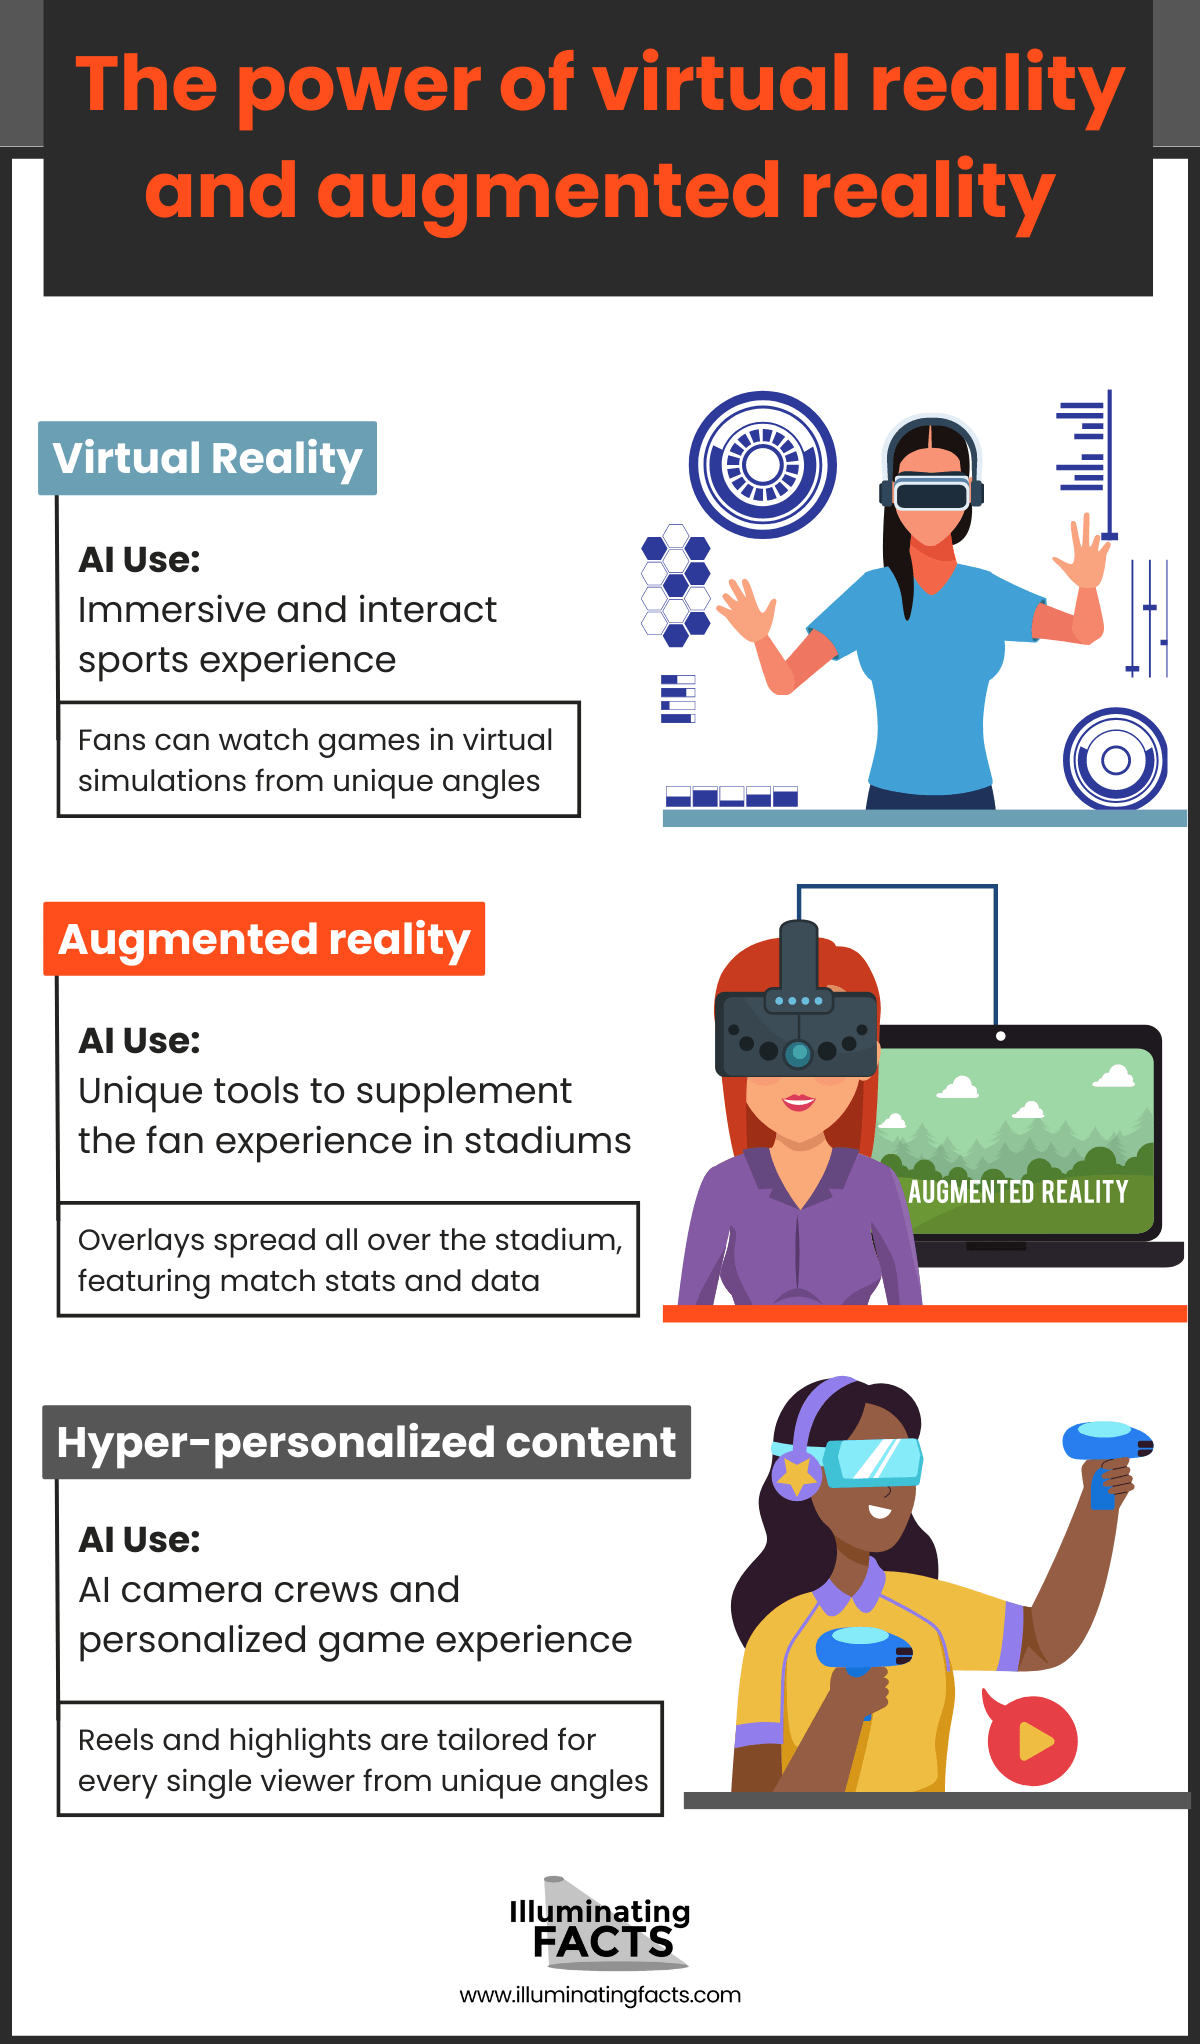 The power of virtual reality and augmented reality